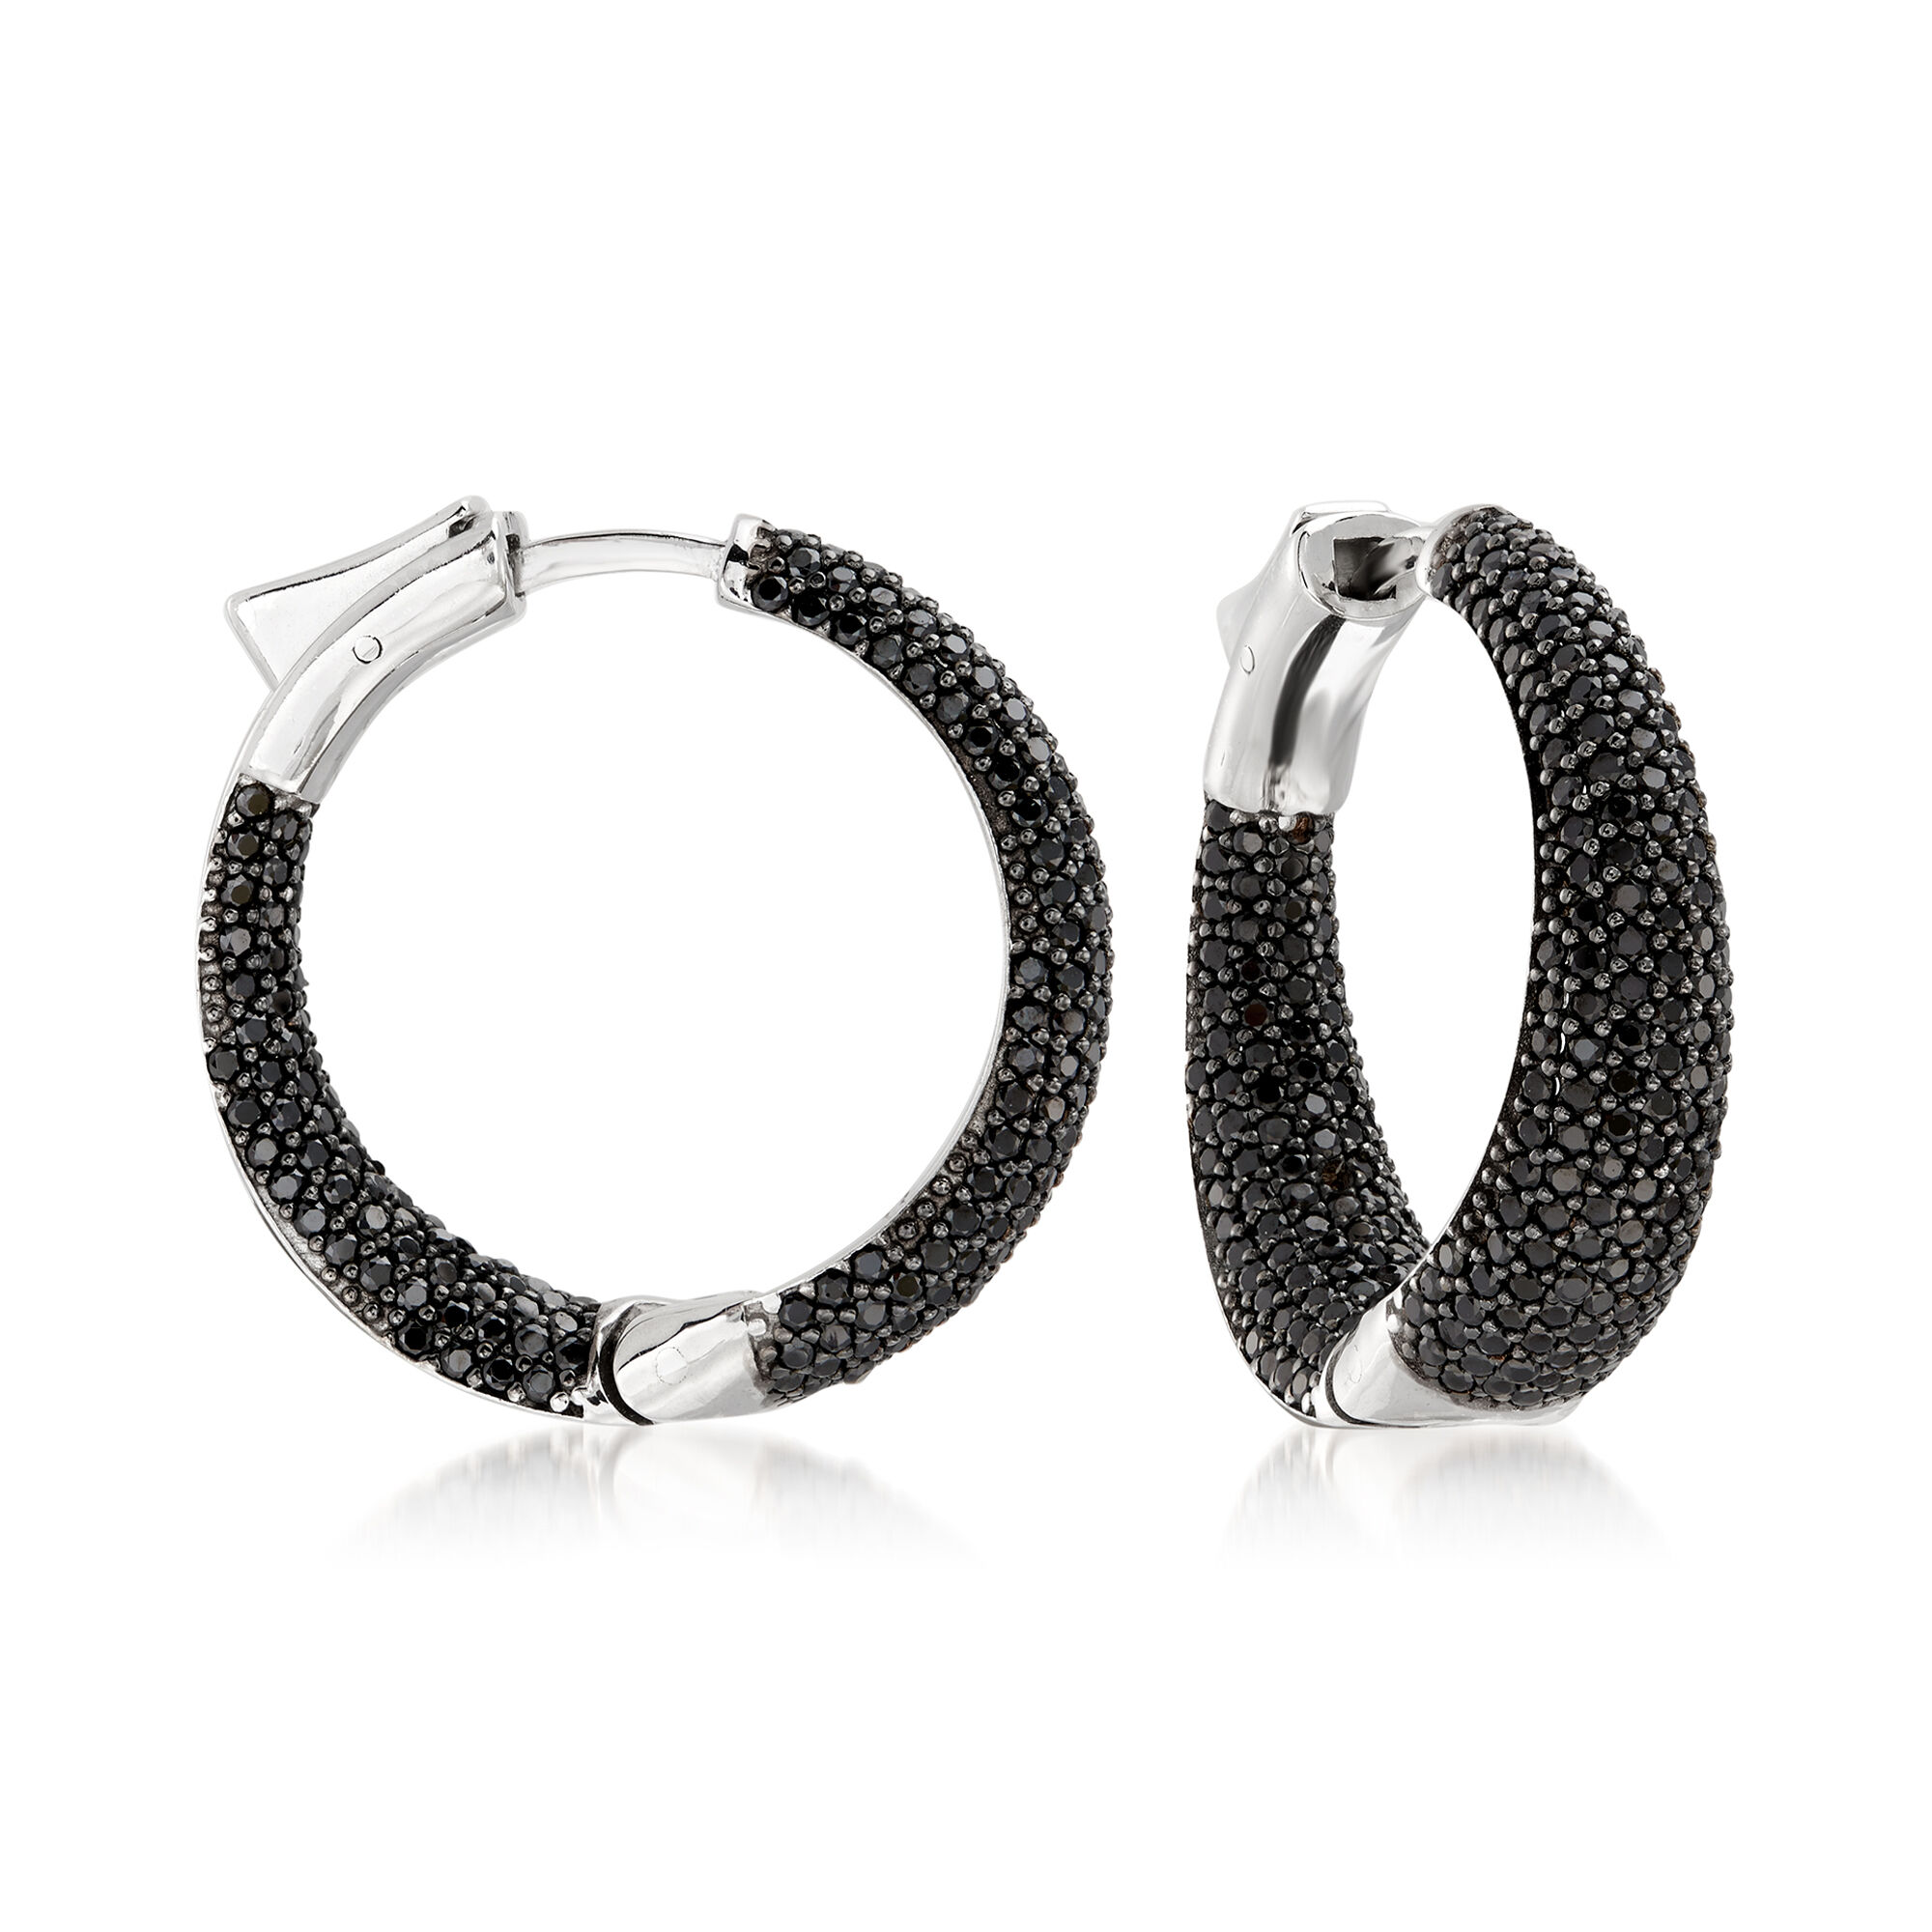 Rosetone/Platinum Plated 9 ctw Hoop Earrings for Women Gifts Shop LC Black Spinel Hoops